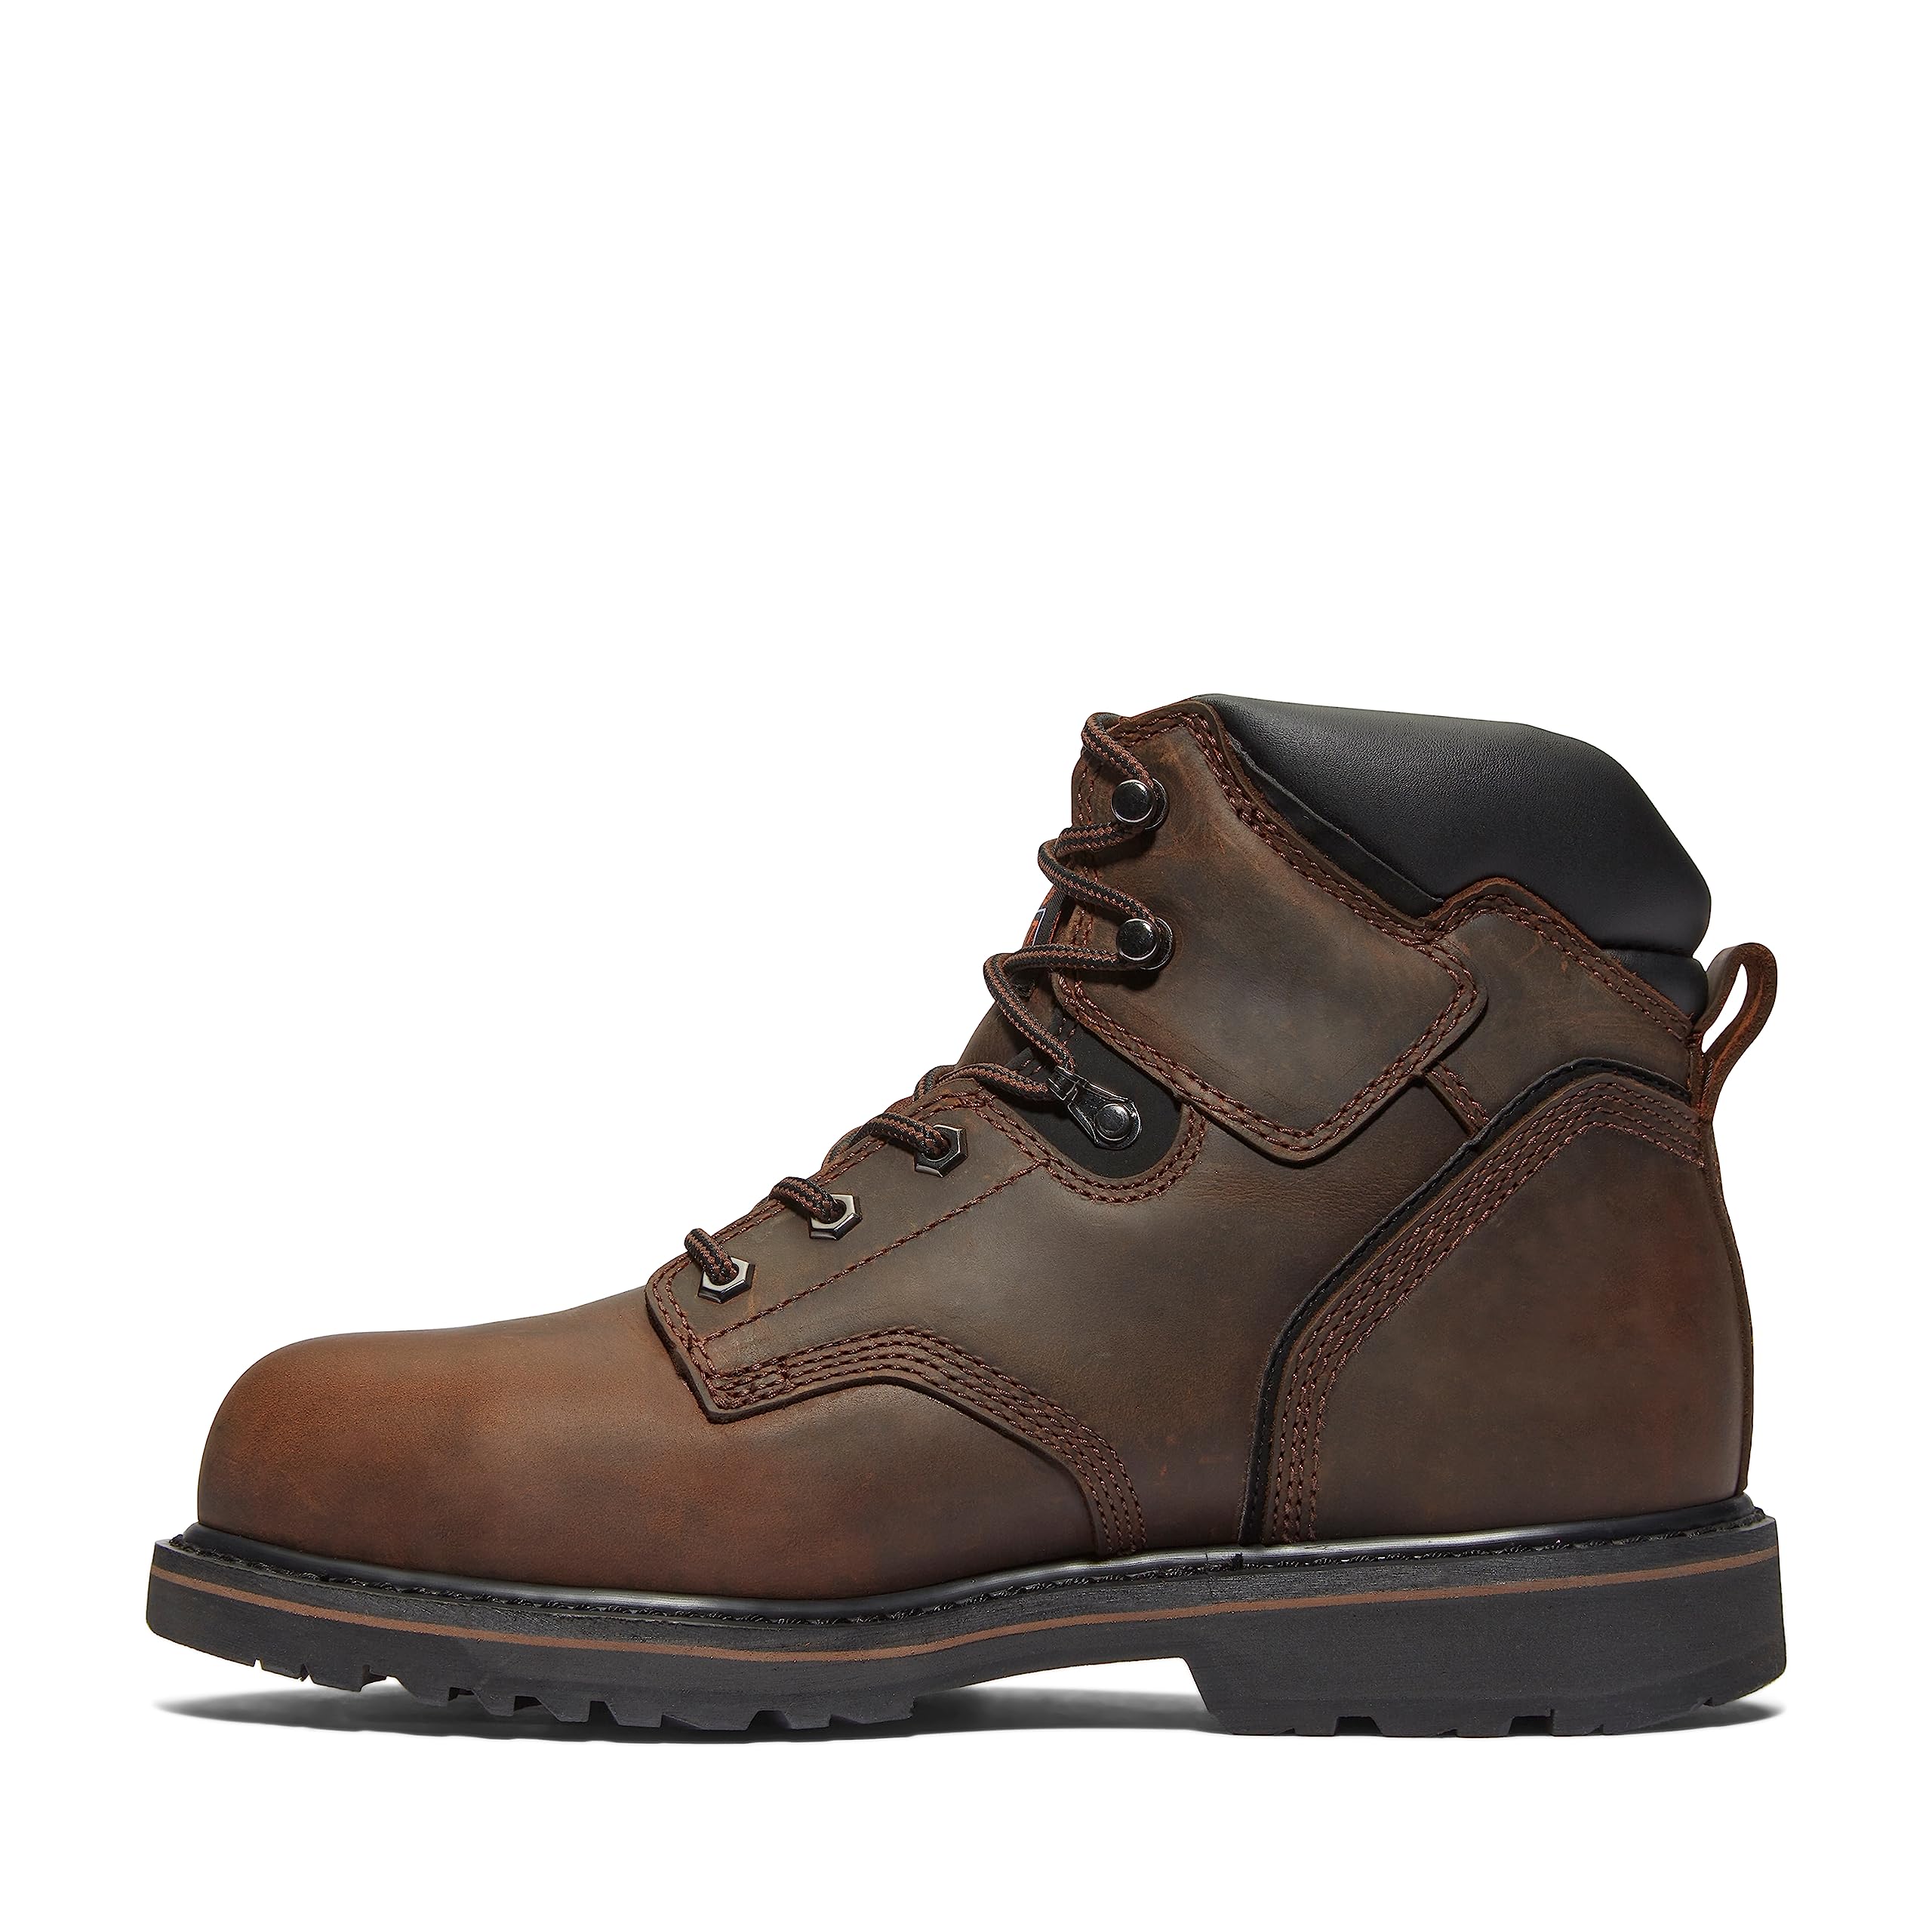 Timberland Men's Pit Boss 6 Inch Steel Safety Toe Industrial Work Boot